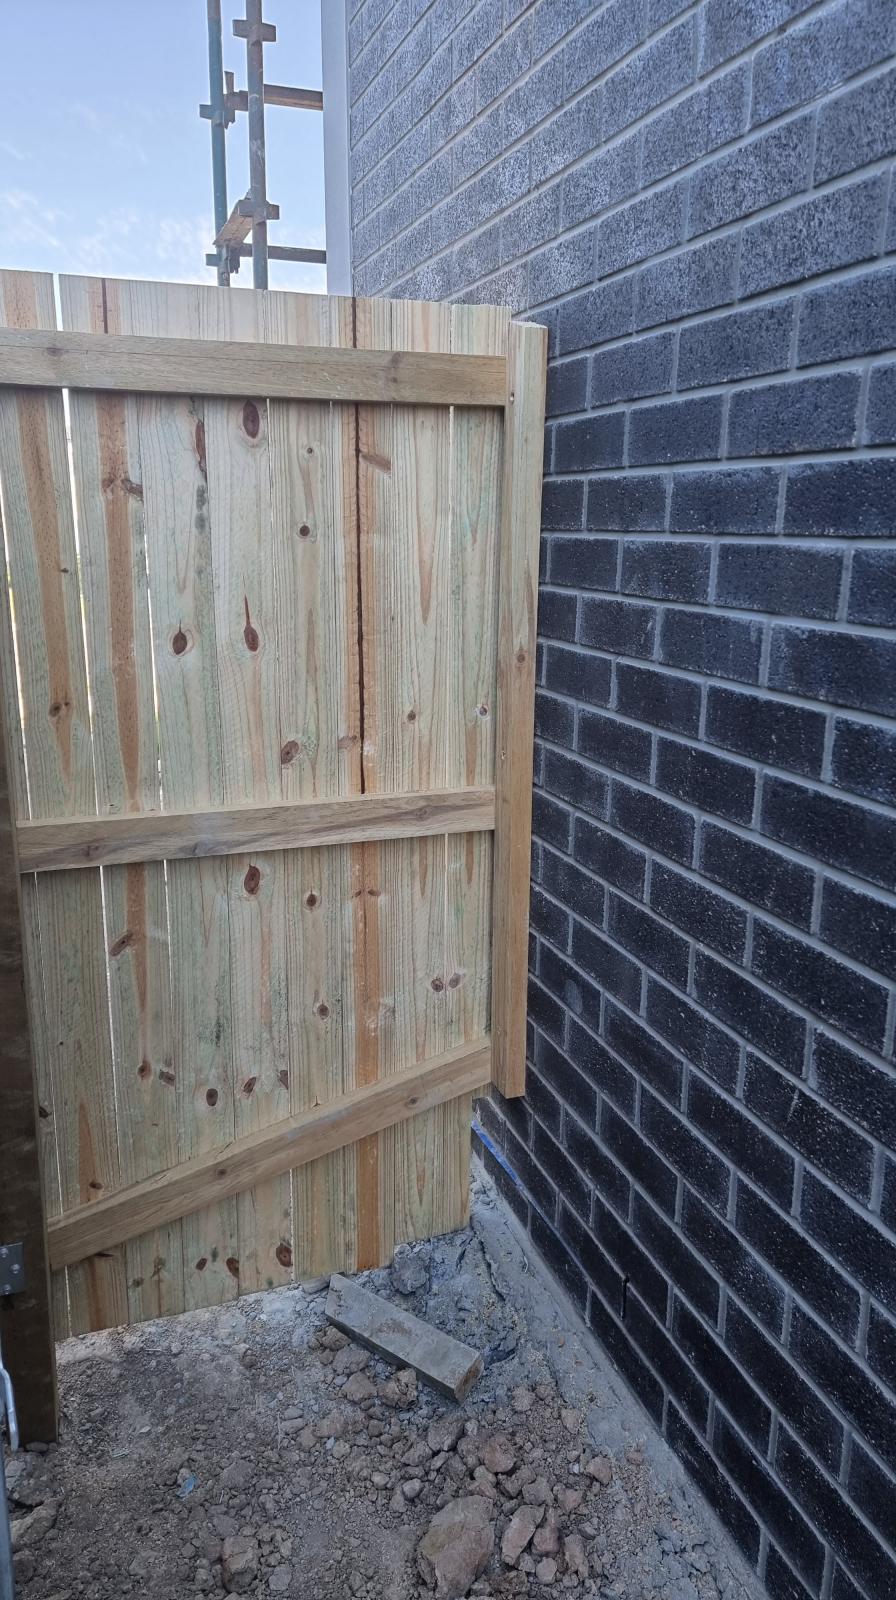 Neighbours bolted fence to my wall during construction